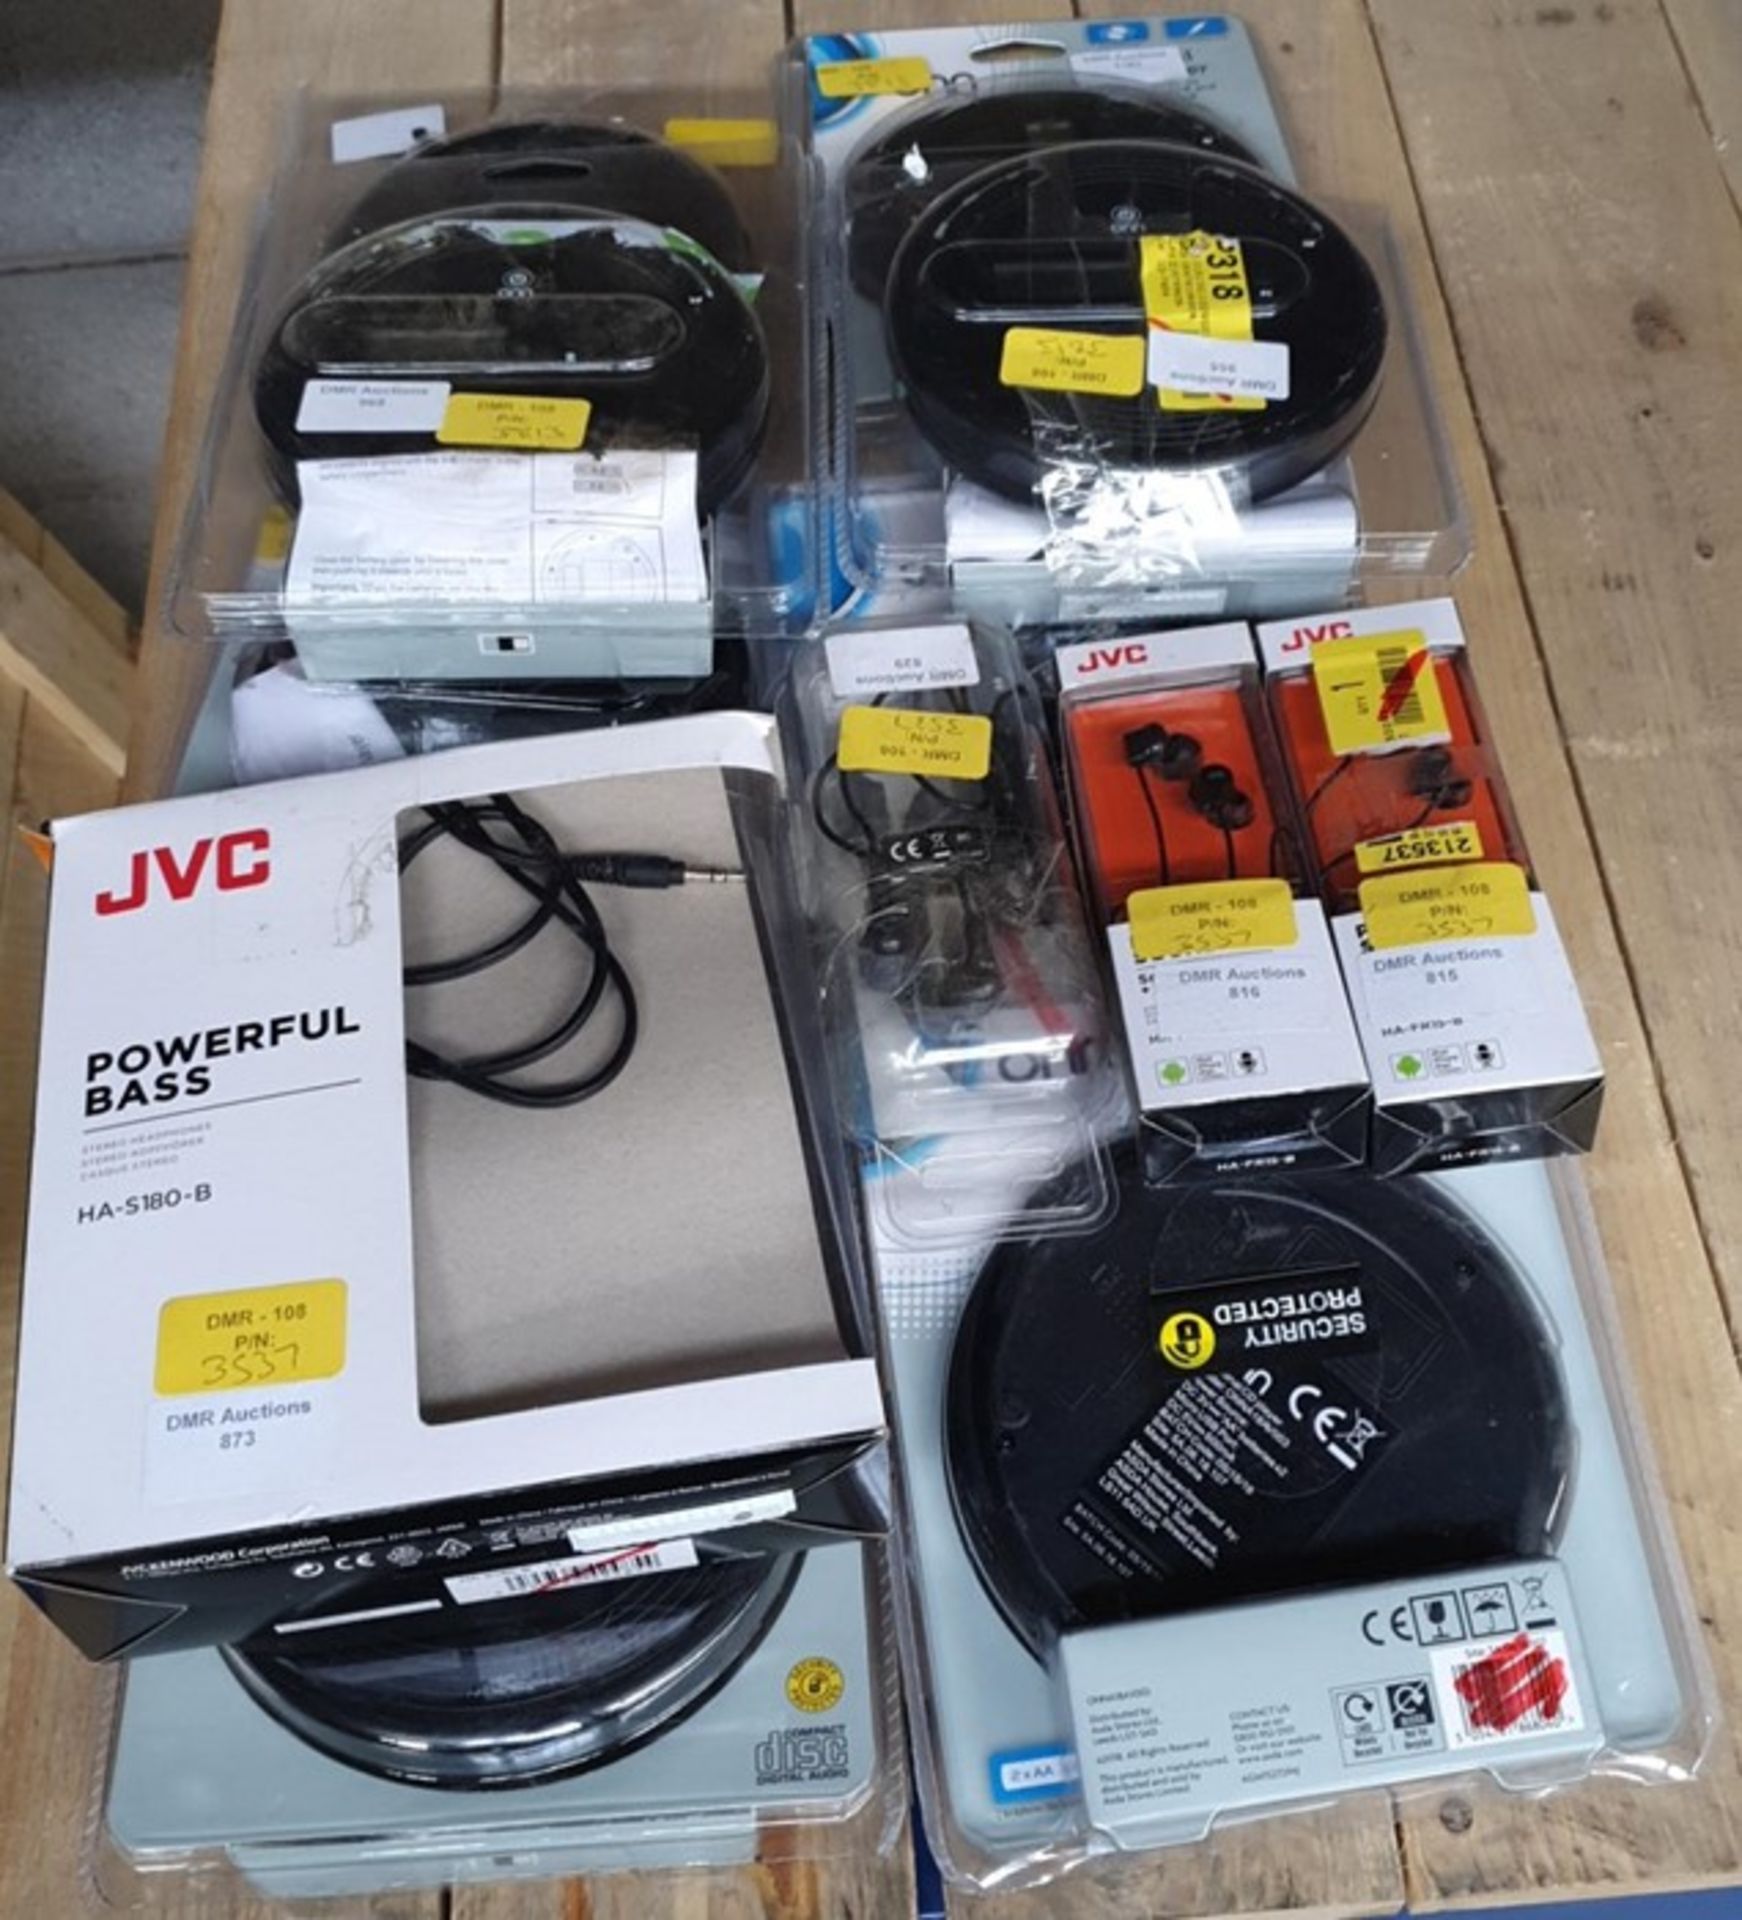 1 LOT TO CONTAIN APPROX 12 ELECTRICALS, INCLUDES ONN PERSONAL CD PLAYERS, HEADSET, EARPHONES, /